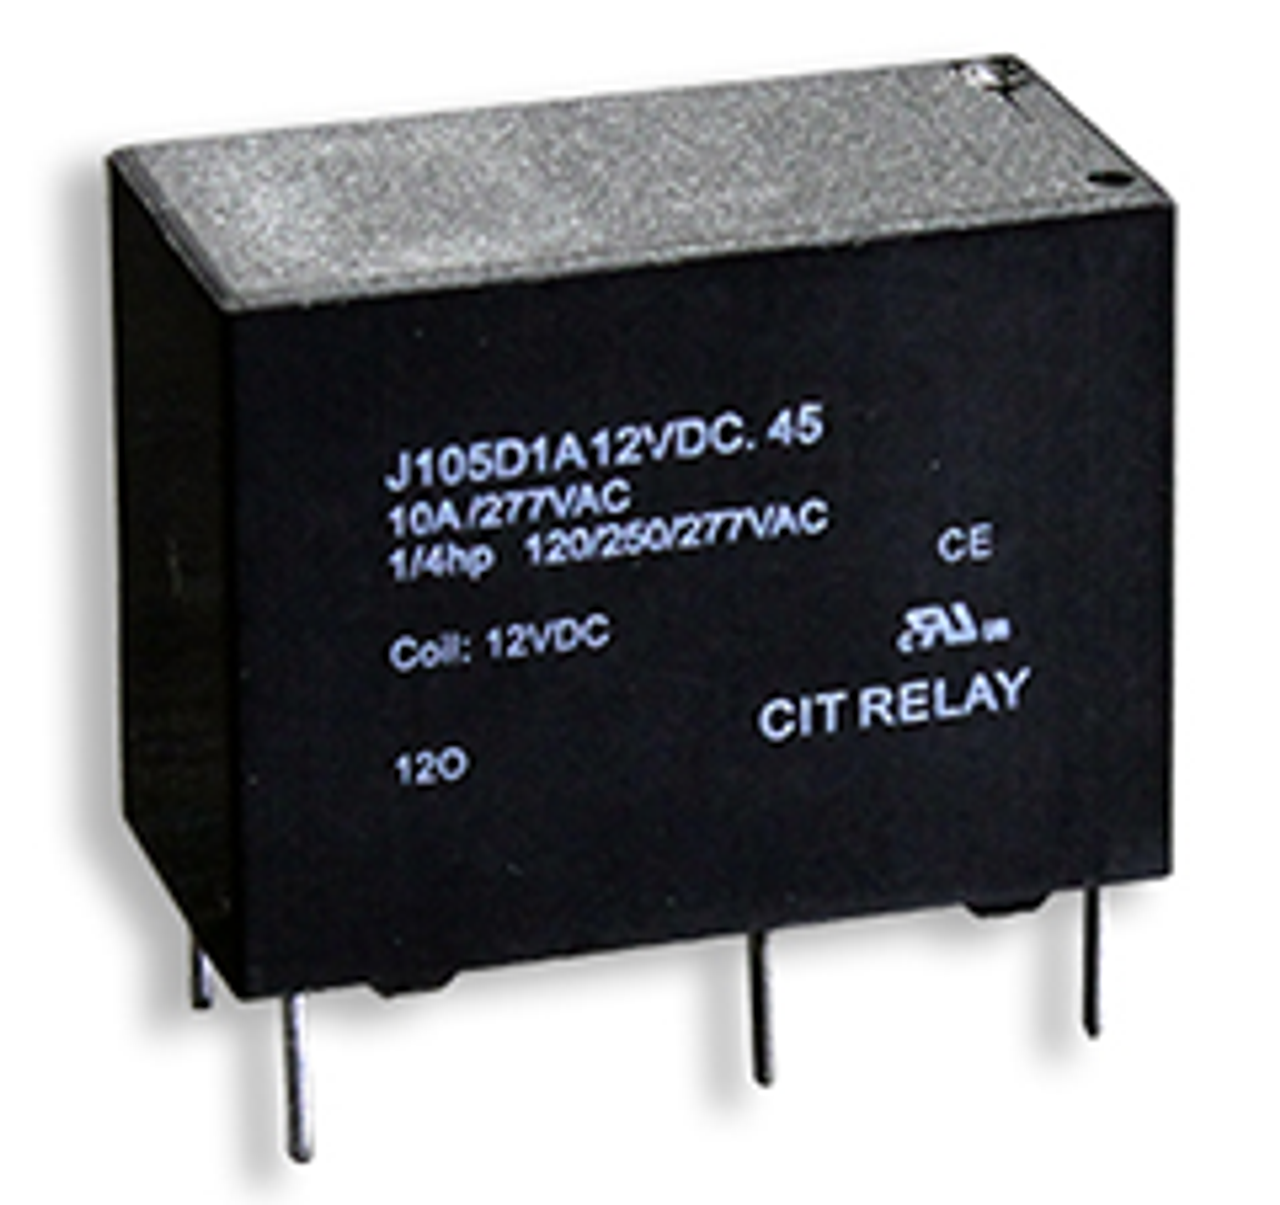 CIT Relay and Switch J105D1AS3VDC.20 Power Relays